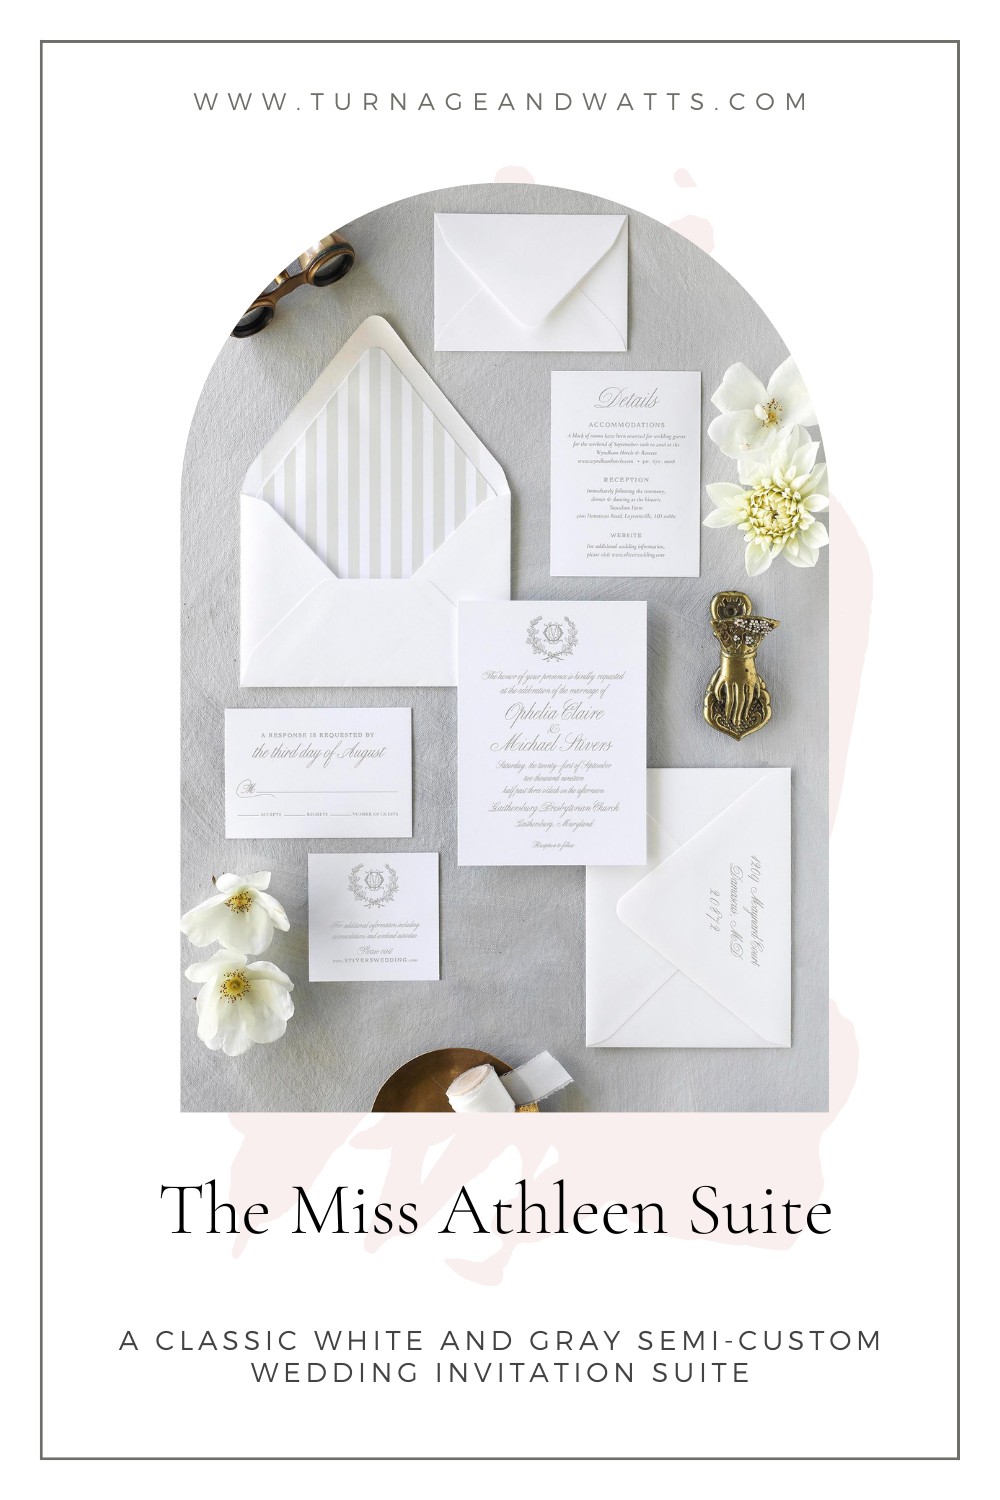 Turnage + Watts - The Miss Athleen Suite